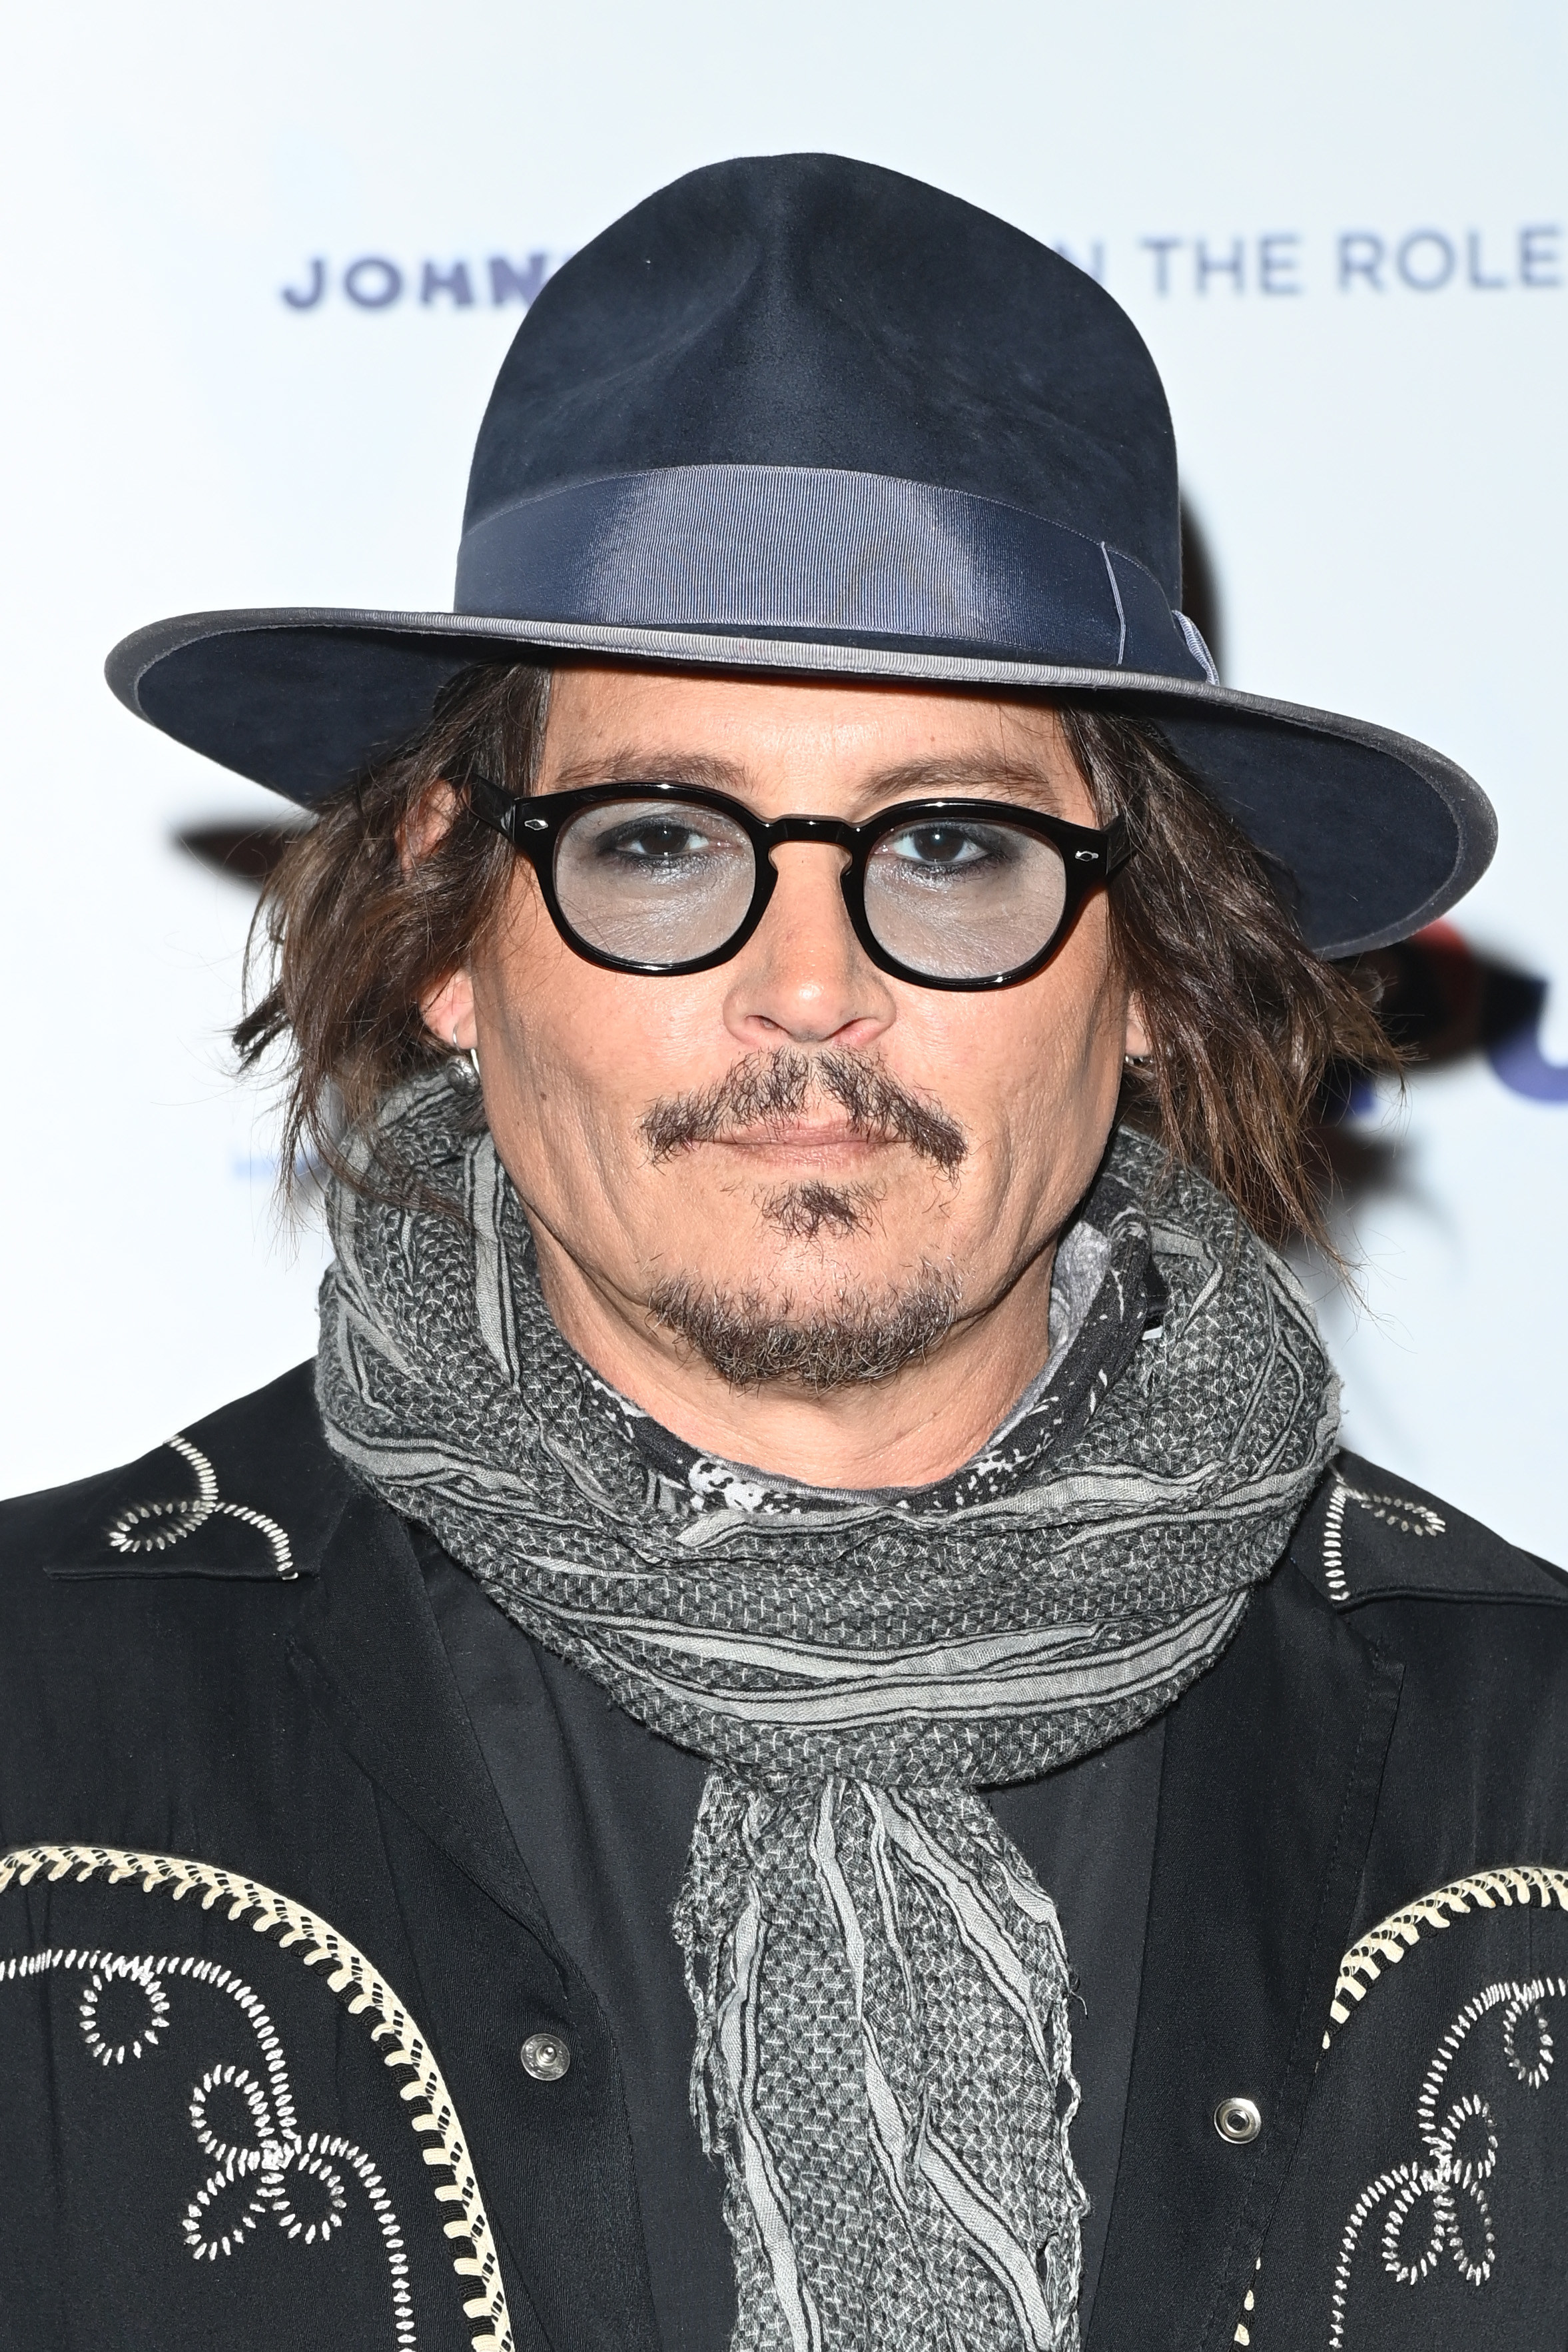 Johnny Depp is pictured at a red carpet event on October 17, 2021